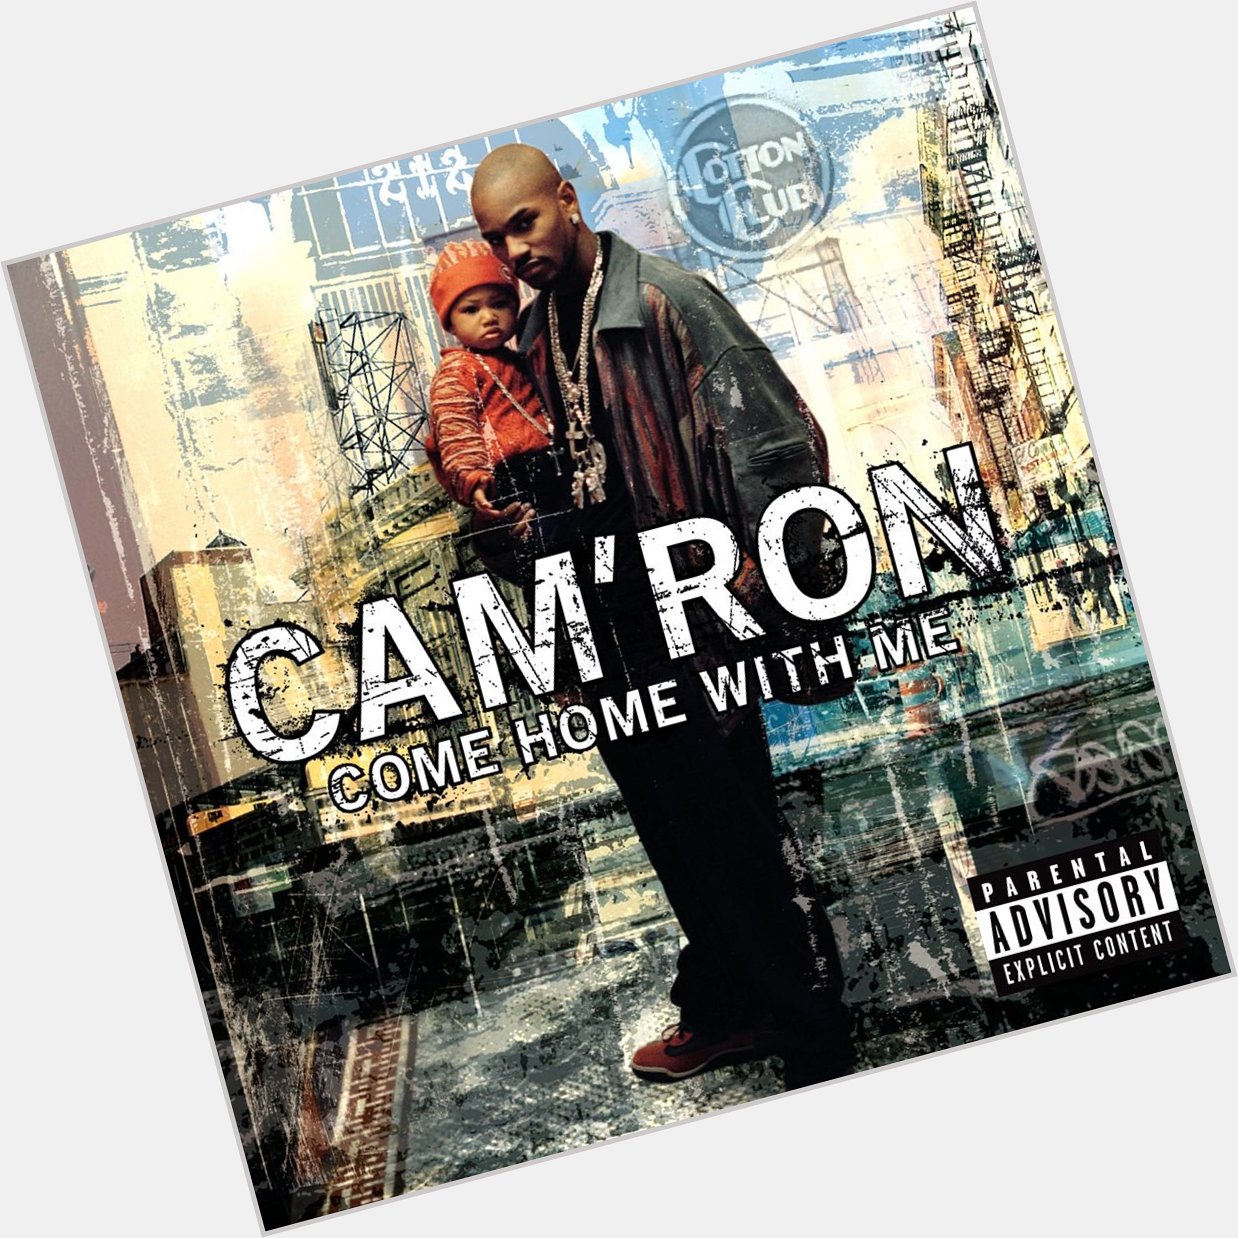 A Happy Birthday to Cam\ron, born this day 1976. Explore +350 samples, covers and remixes:  